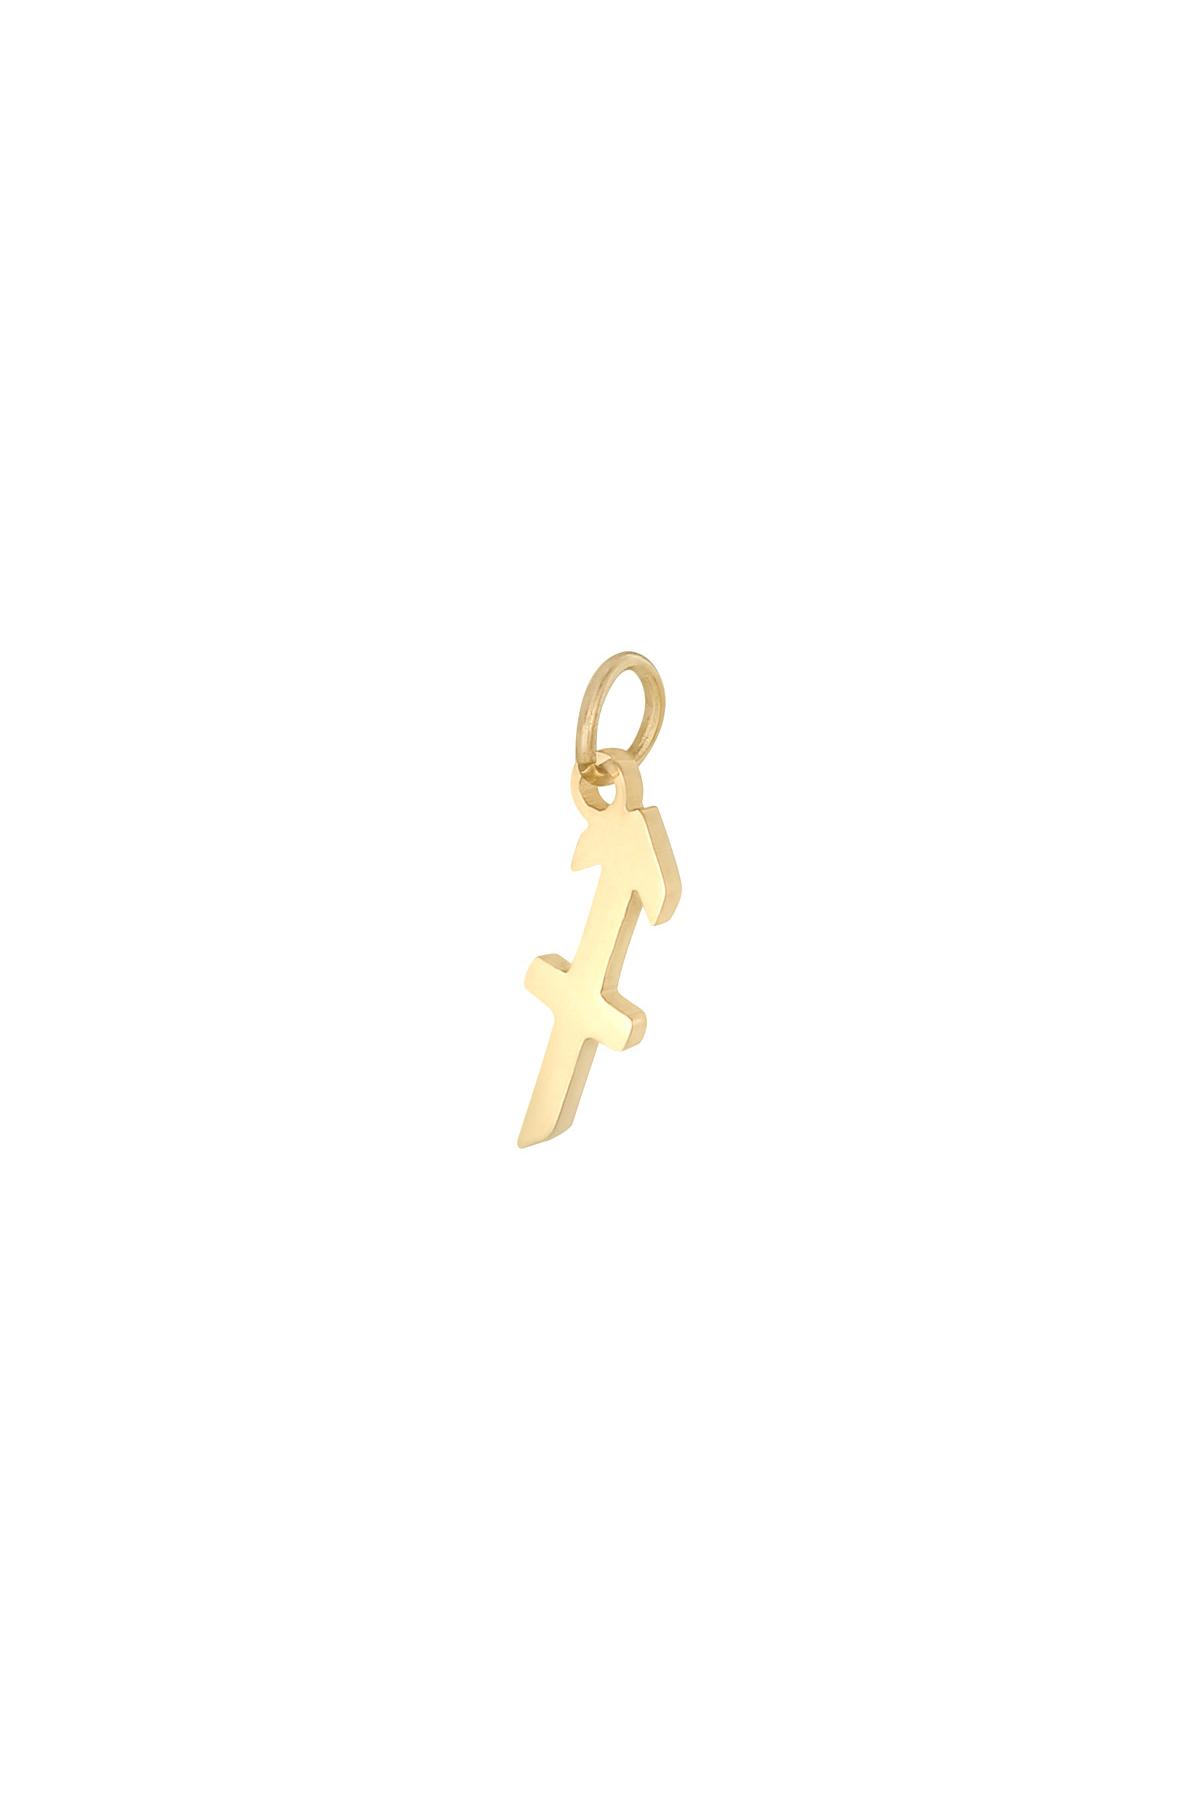 Gold / Charm Zodiac Sagittarius Gold Stainless Steel Picture22